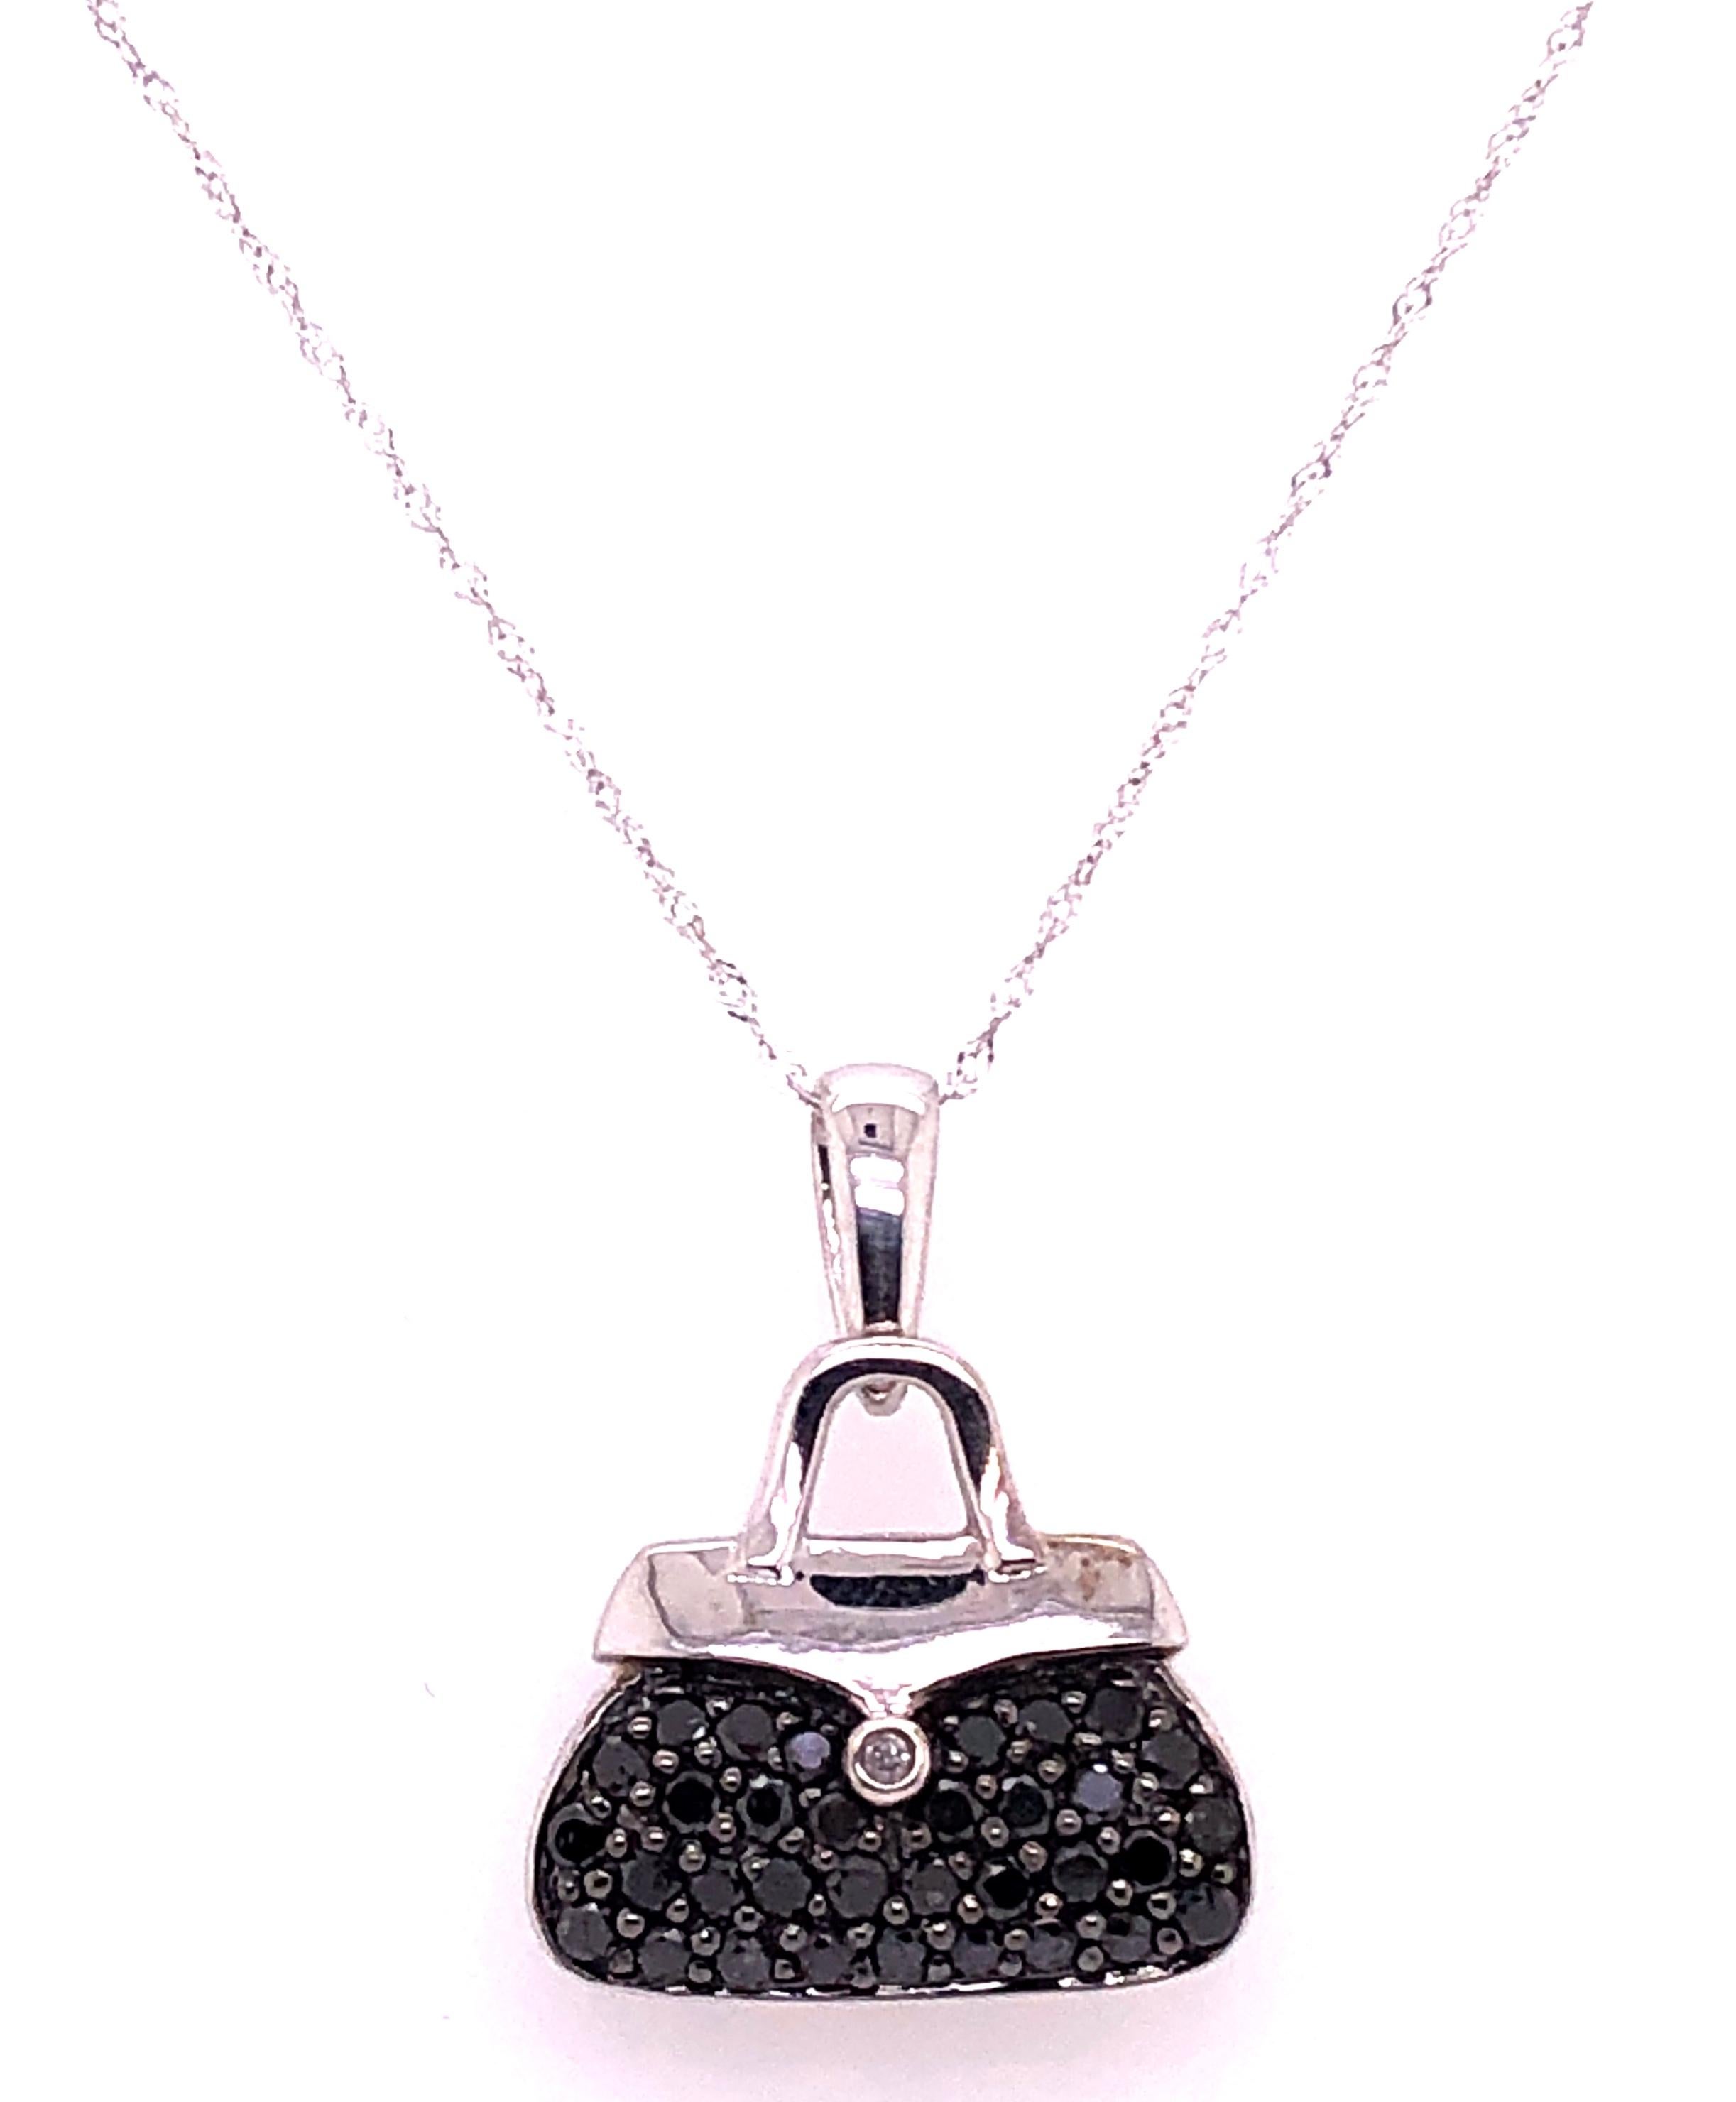 10 Karat White Gold Free Form 16 Inch Necklace and Fancy Pendant with Diamond. Sweet as can be. A perfect gift. 
0.01 total diamond weight.
4.64 grams total weight.
Pendant stamped 10K Made in China and Chain Marked Made in Turkey.